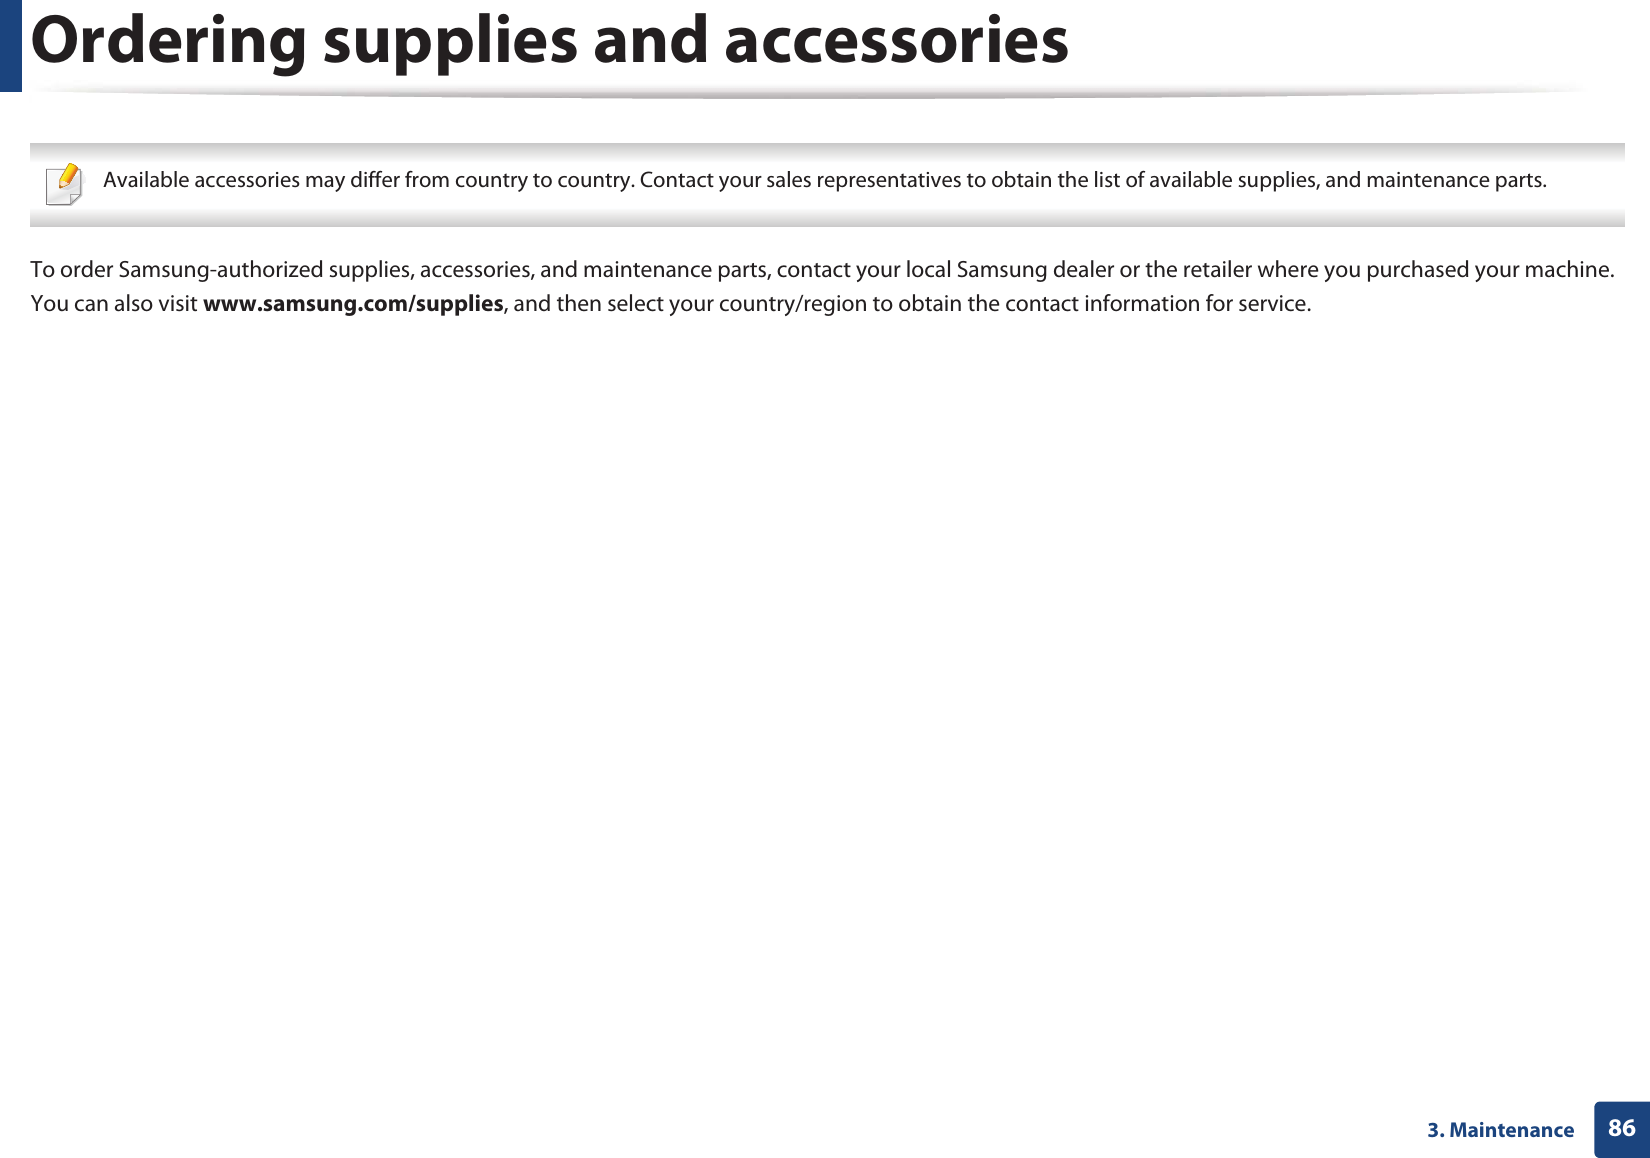 863. MaintenanceOrdering supplies and accessories Available accessories may differ from country to country. Contact your sales representatives to obtain the list of available supplies, and maintenance parts. To order Samsung-authorized supplies, accessories, and maintenance parts, contact your local Samsung dealer or the retailer where you purchased your machine. You can also visit www.samsung.com/supplies, and then select your country/region to obtain the contact information for service.